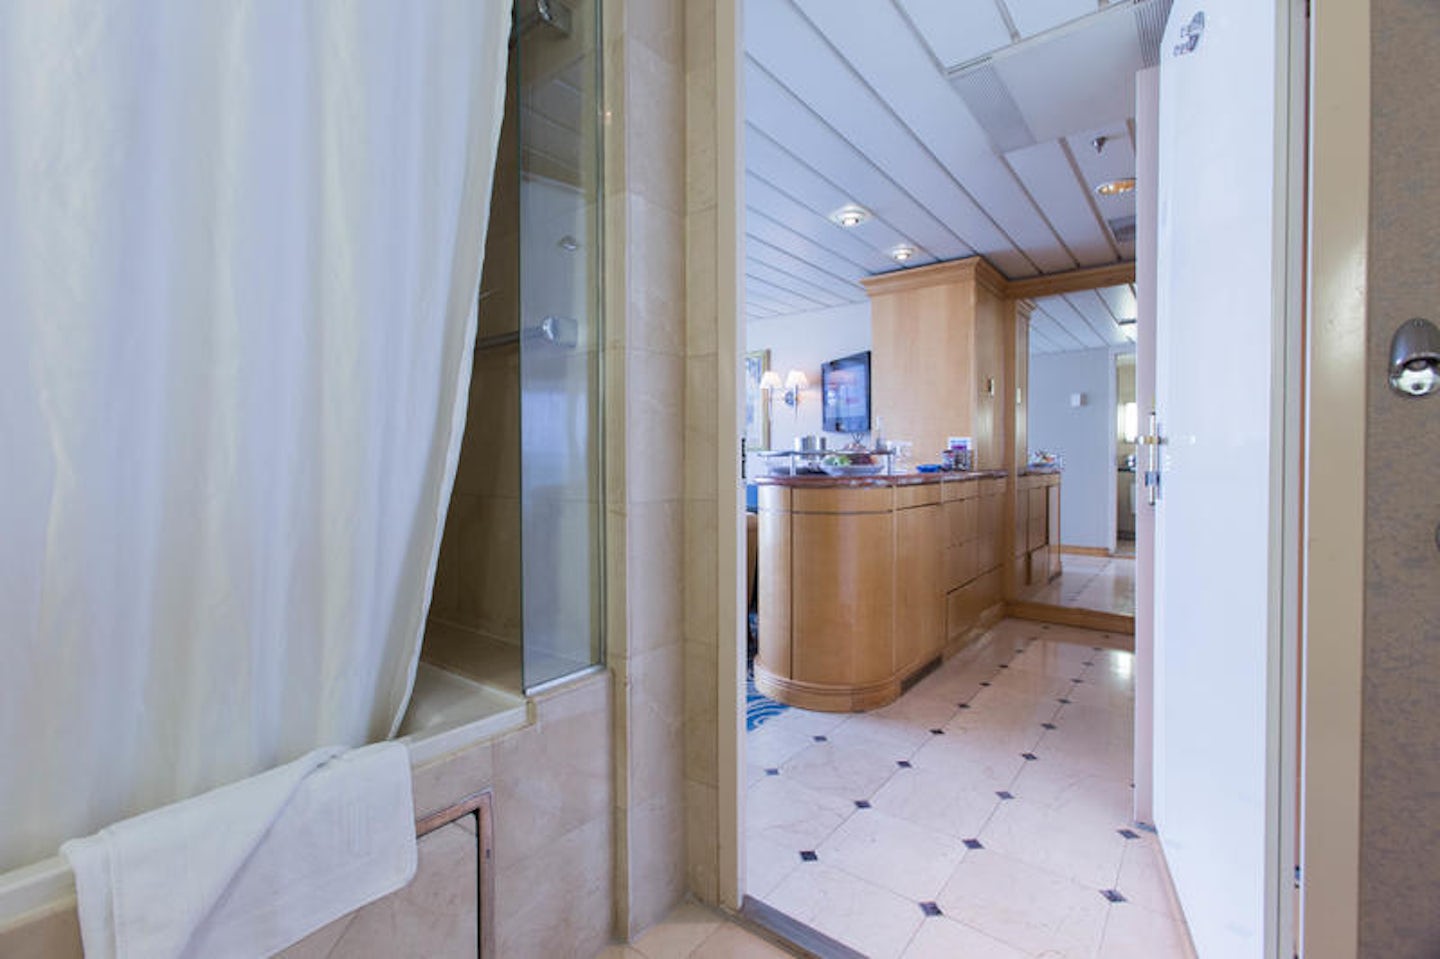 The Grand Suite on Enchantment of the Seas